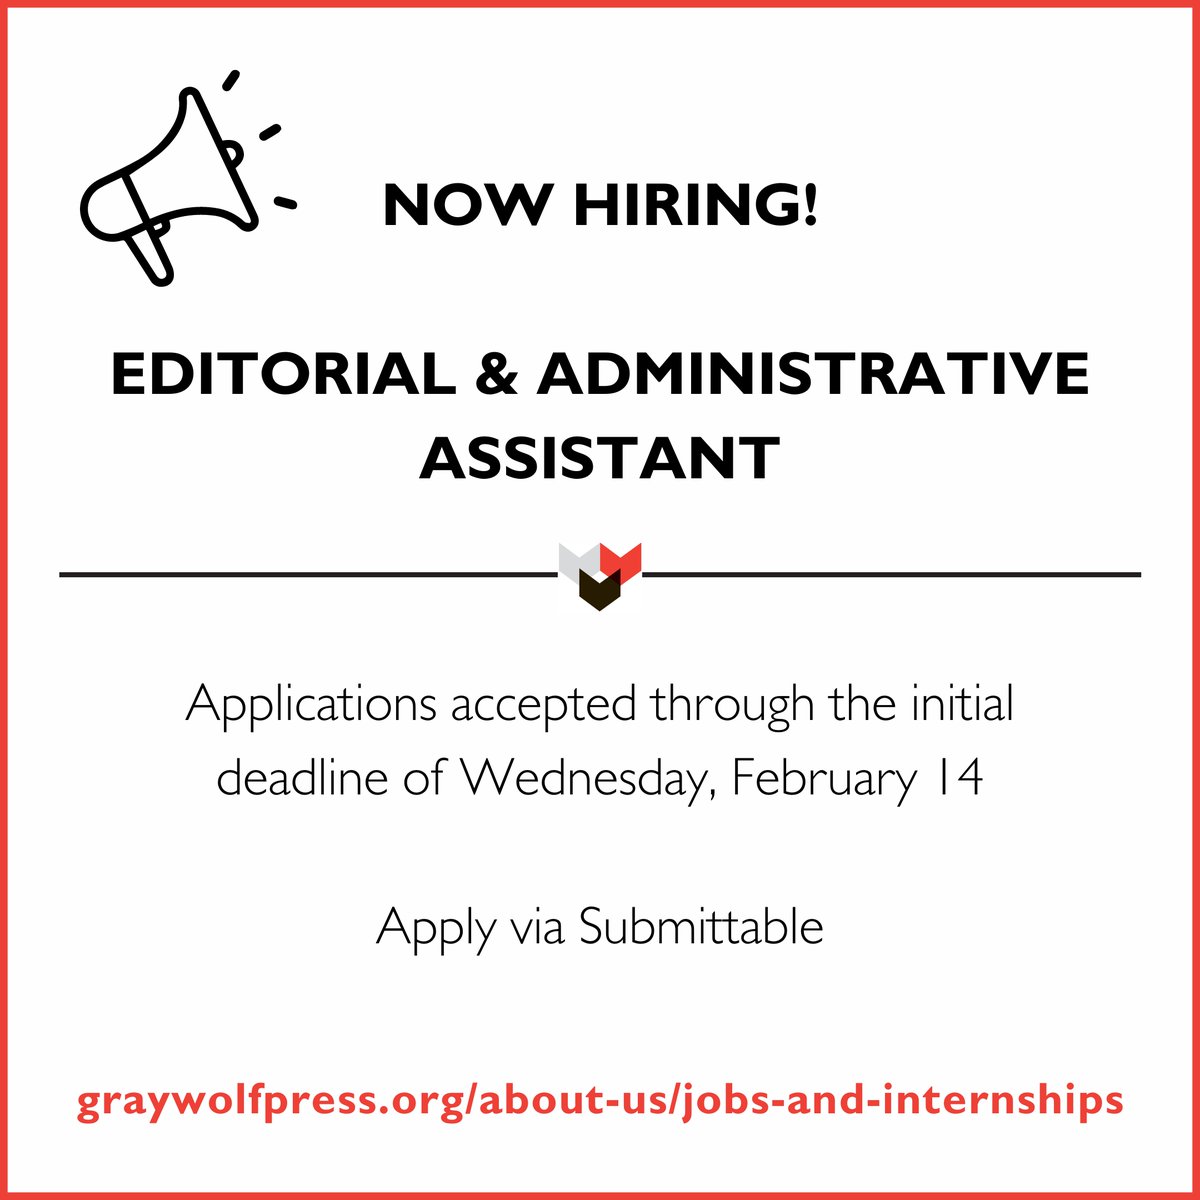 📢 Job opening! We're currently hiring for an Editorial & Administrative Assistant. This position will be based in our Minneapolis office. $40K / year. Apply by Feb. 14! Details: graywolfpress.org/about-us/jobs-…